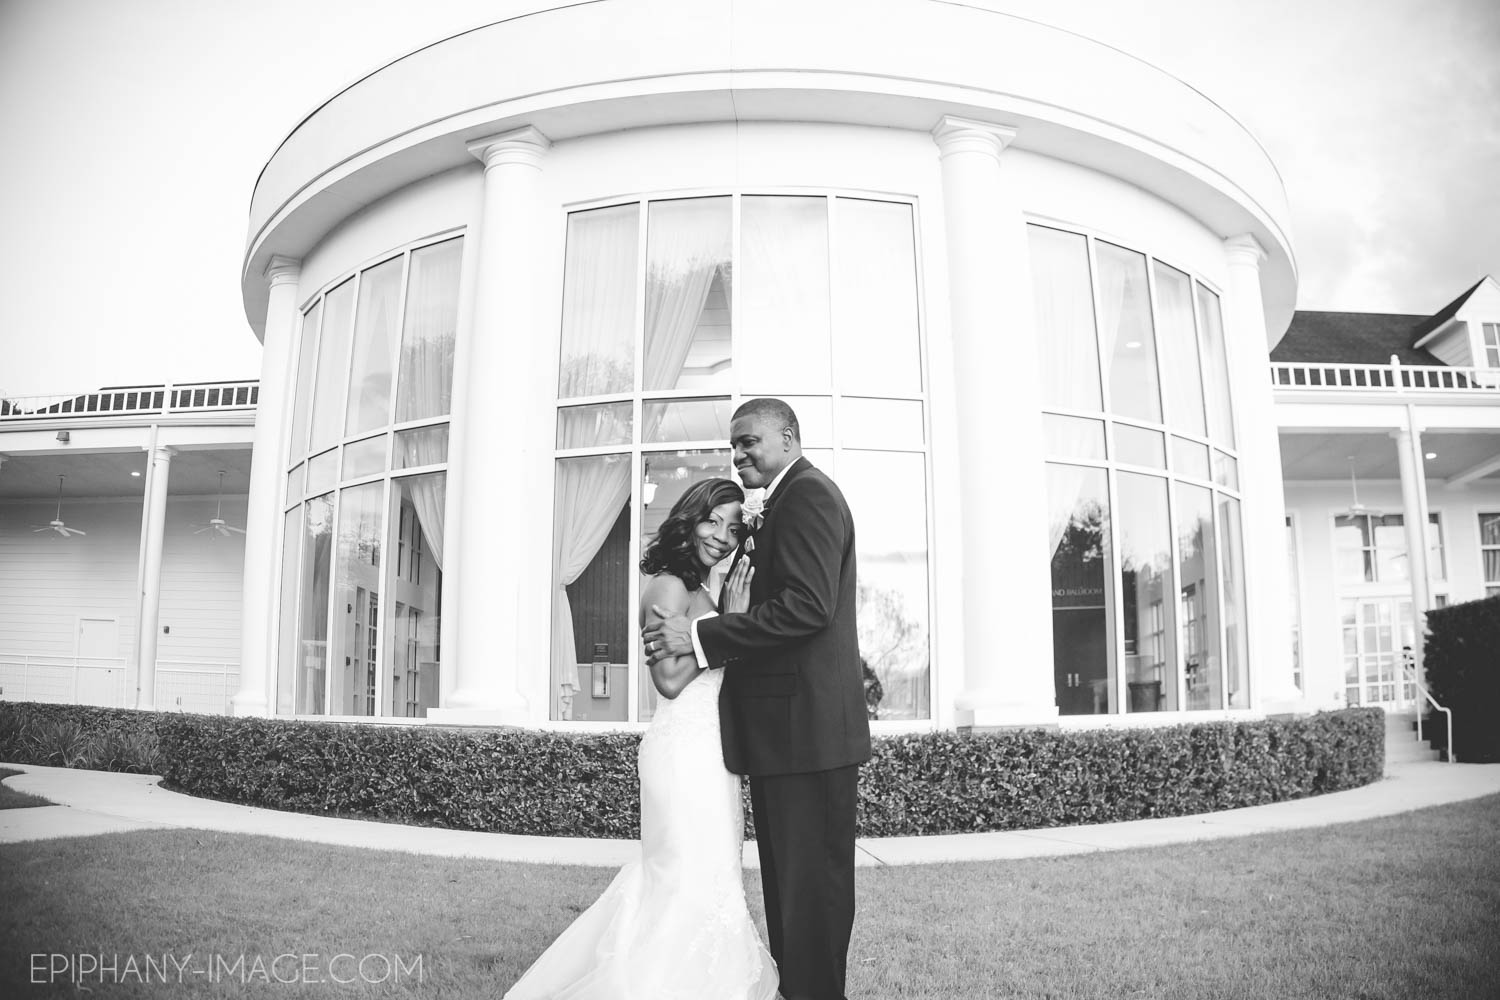 The Williams Wedding Photography at the Lake Mary Event Center by Nathalie P. of EpiphanyImage.com